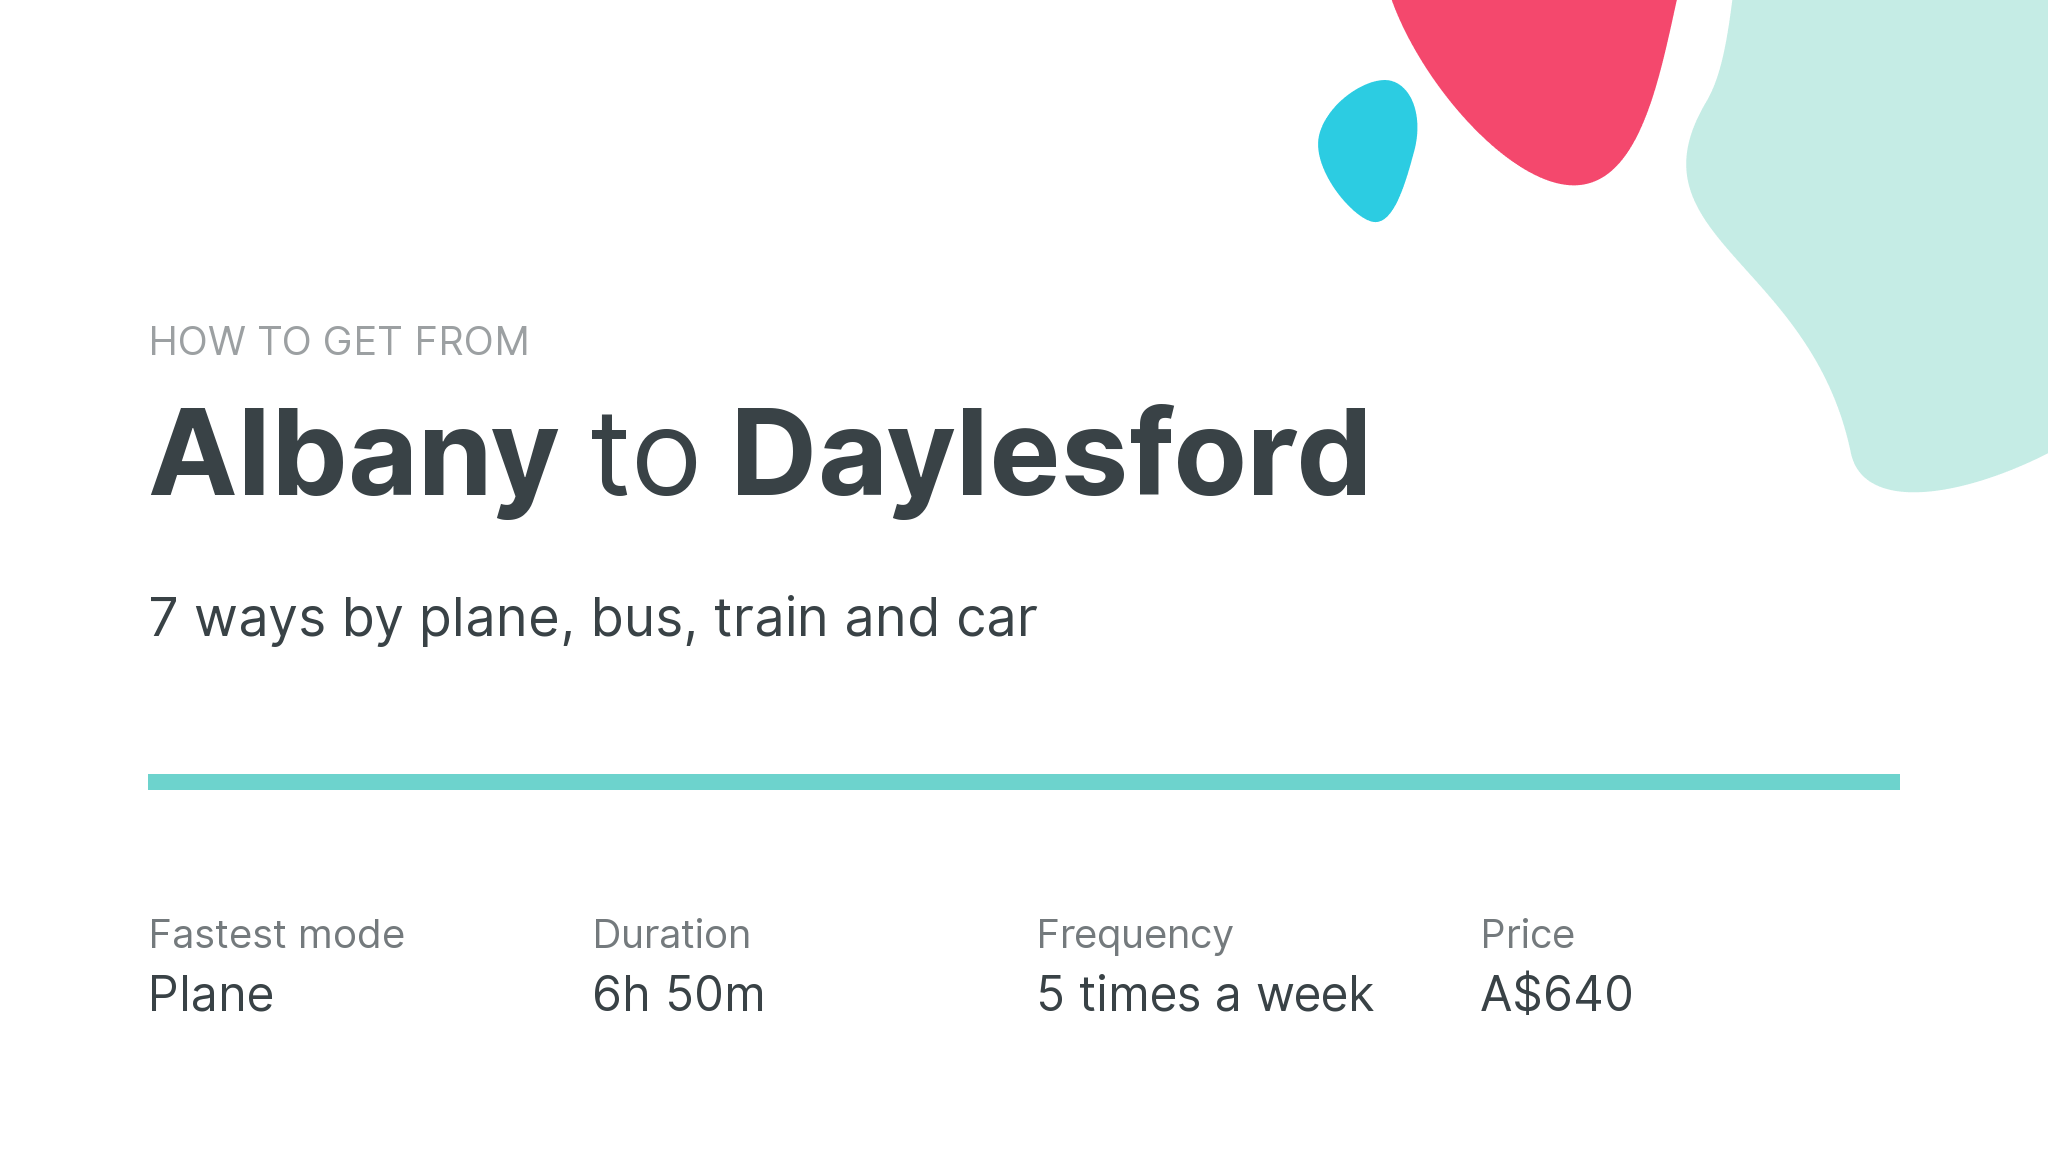 How do I get from Albany to Daylesford